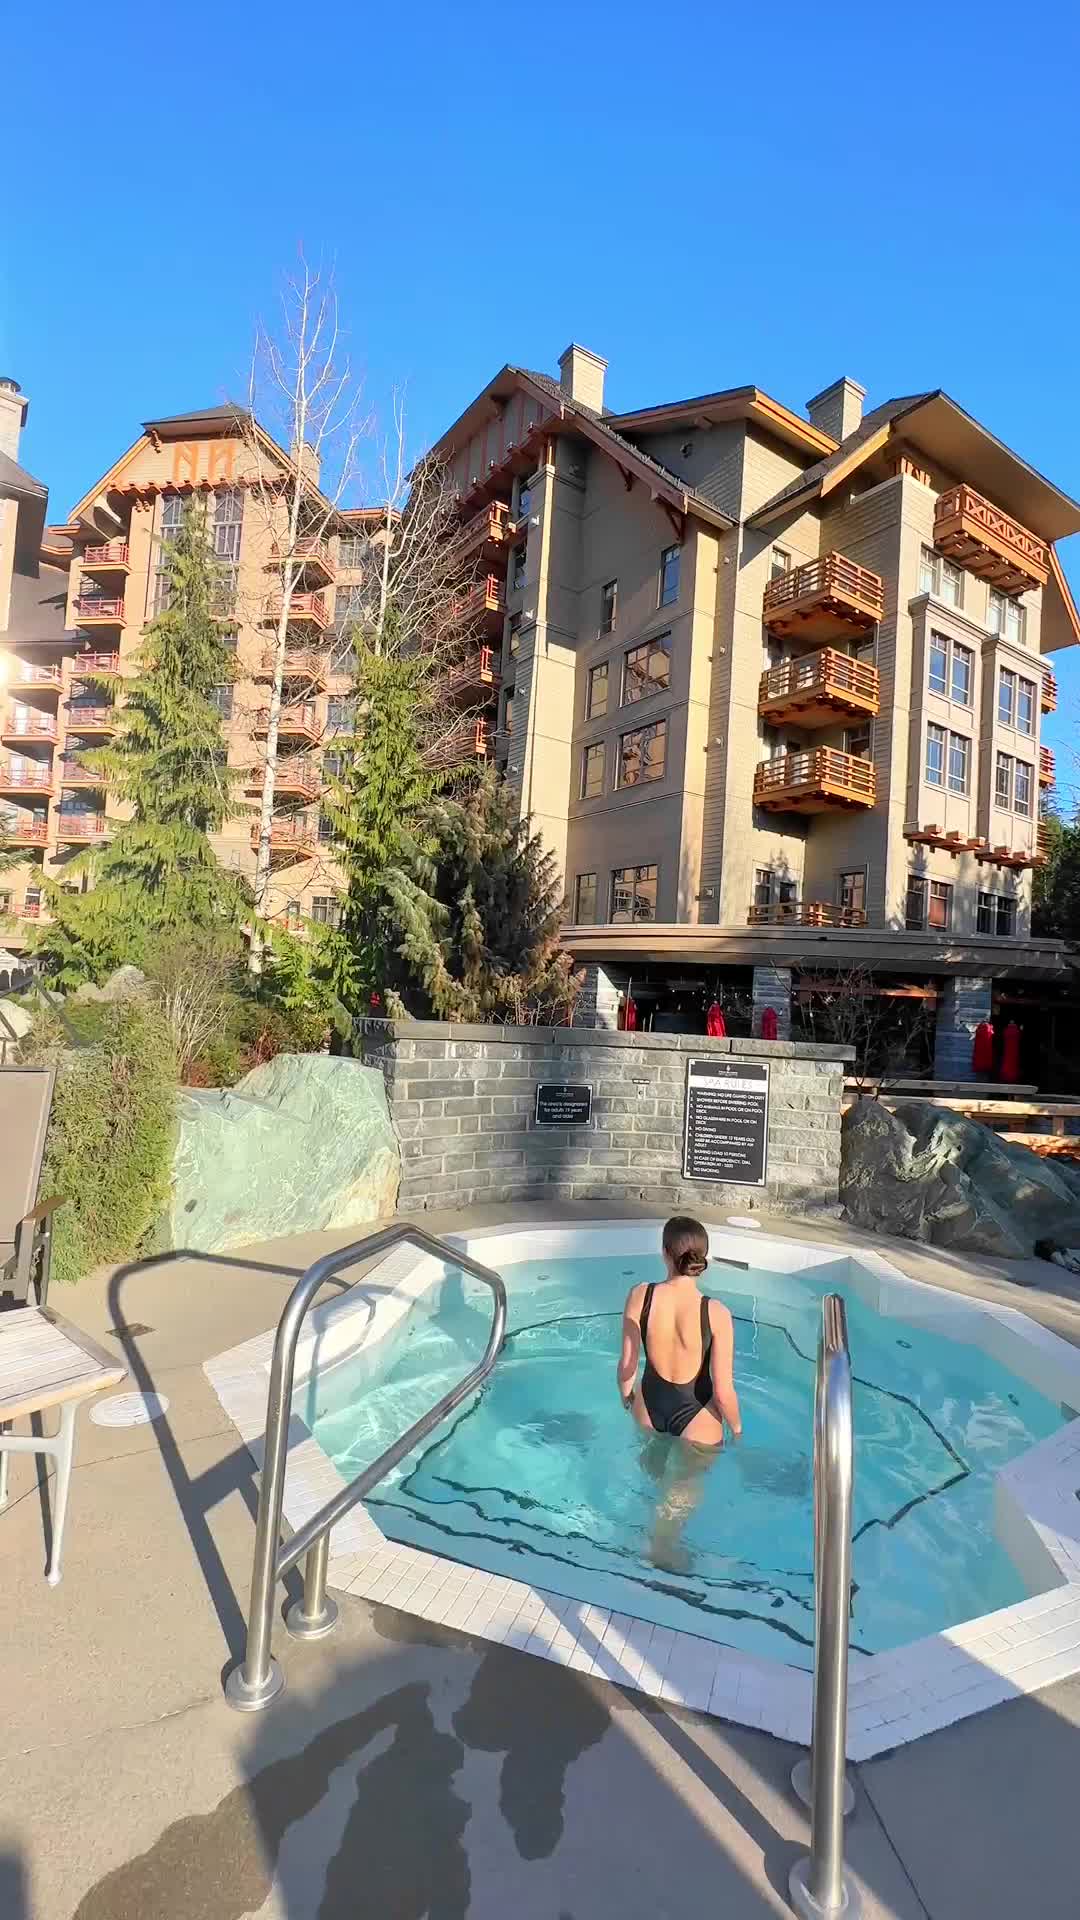 Luxurious Stay at Four Seasons Resort Whistler